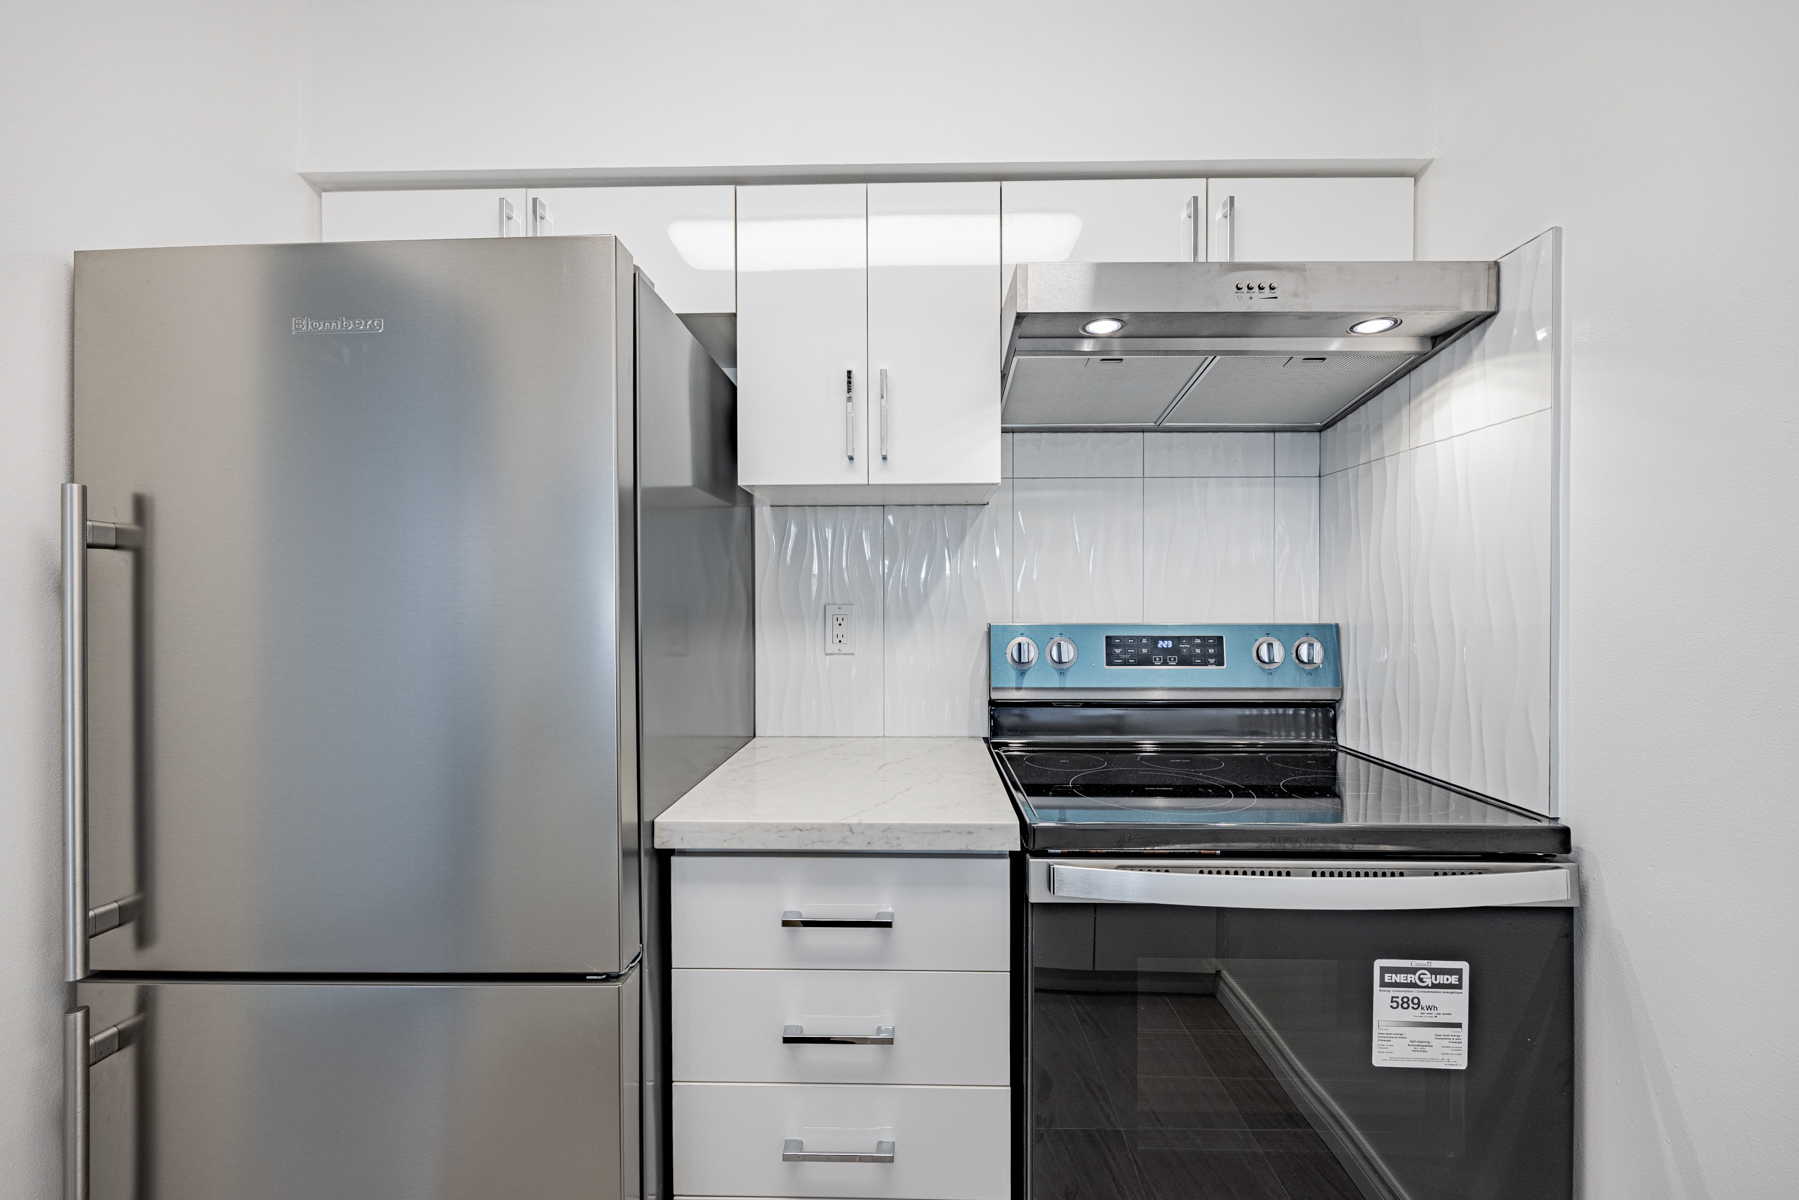 Condo kitchen with ample storage cabinets, under-hood lights and tiled back-splash.